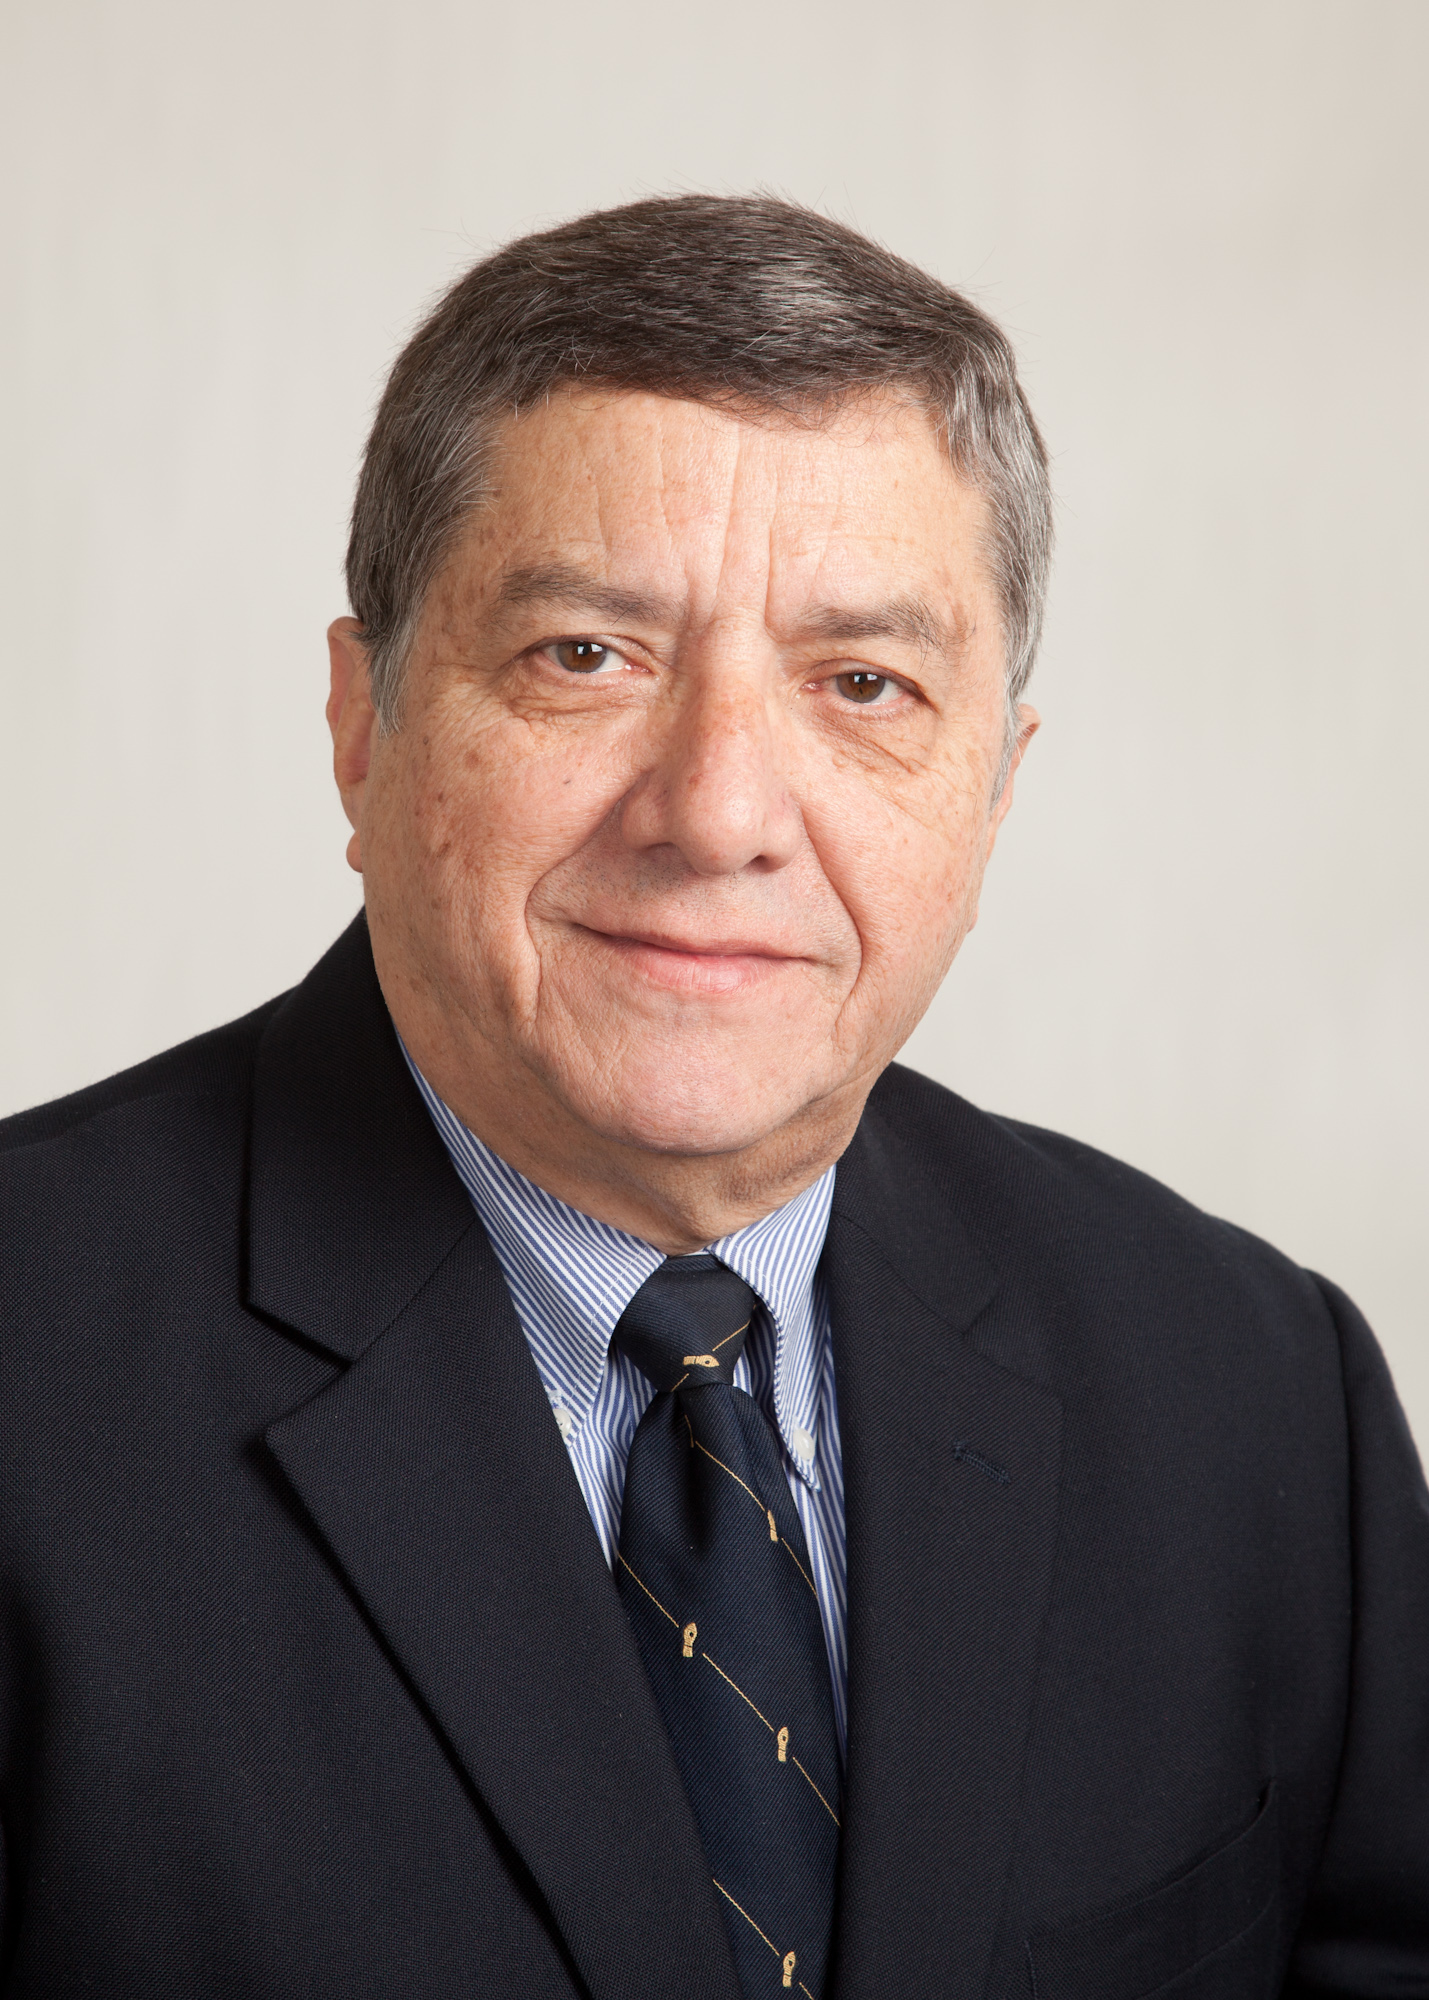 Dr. José F. Cordero to receive APHA Sedgwick Memorial Medal for Distinguished Service